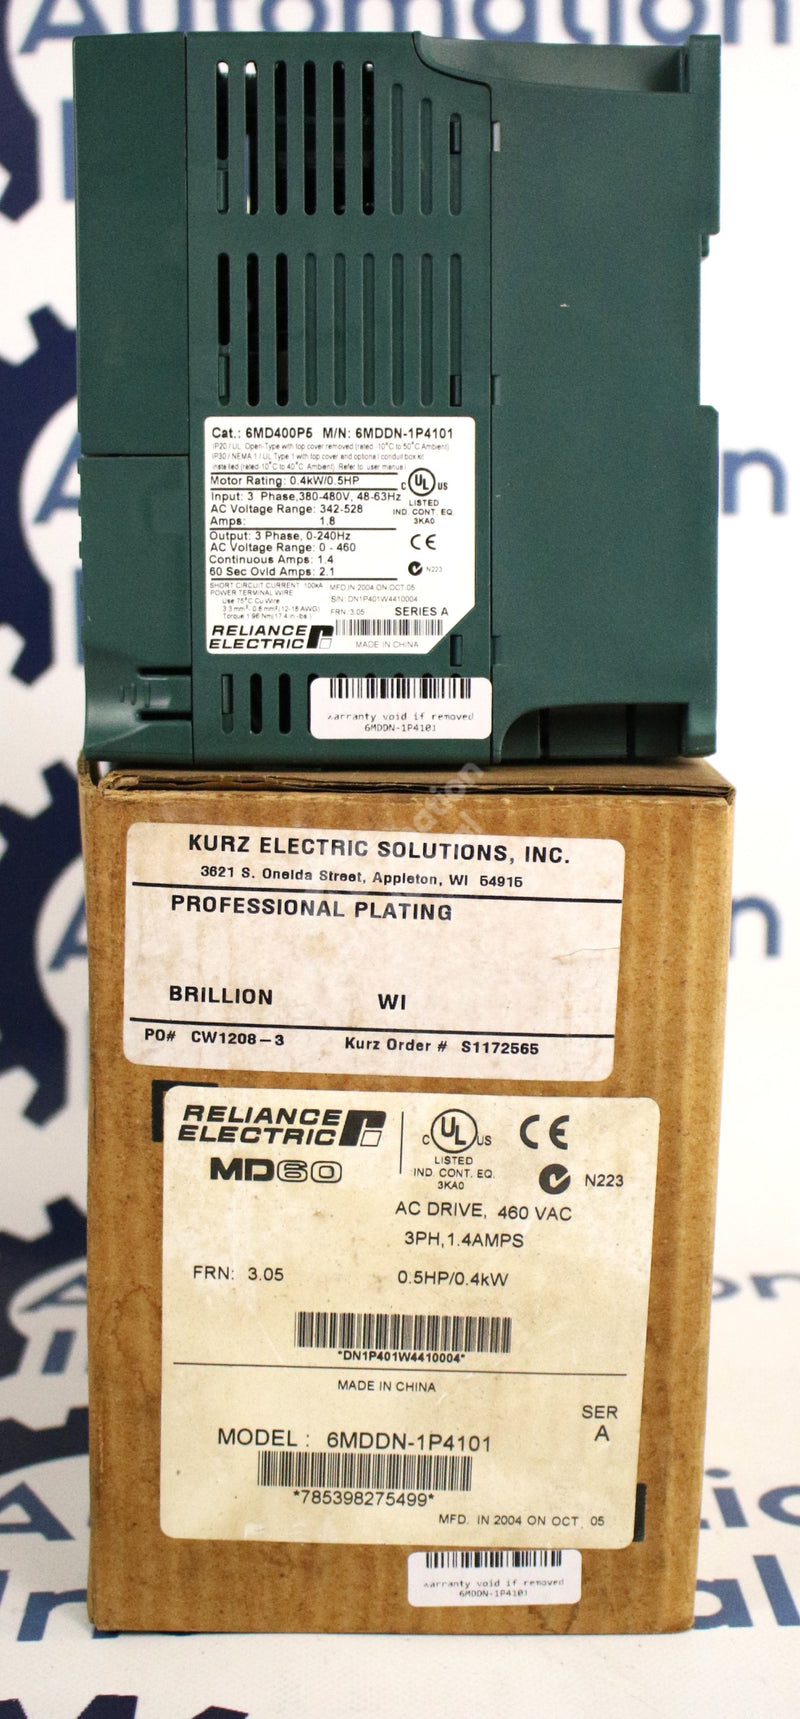 6MDDN-1P4101 by Reliance Electric .5HP AC Drive MD60 New Surplus Factory Package